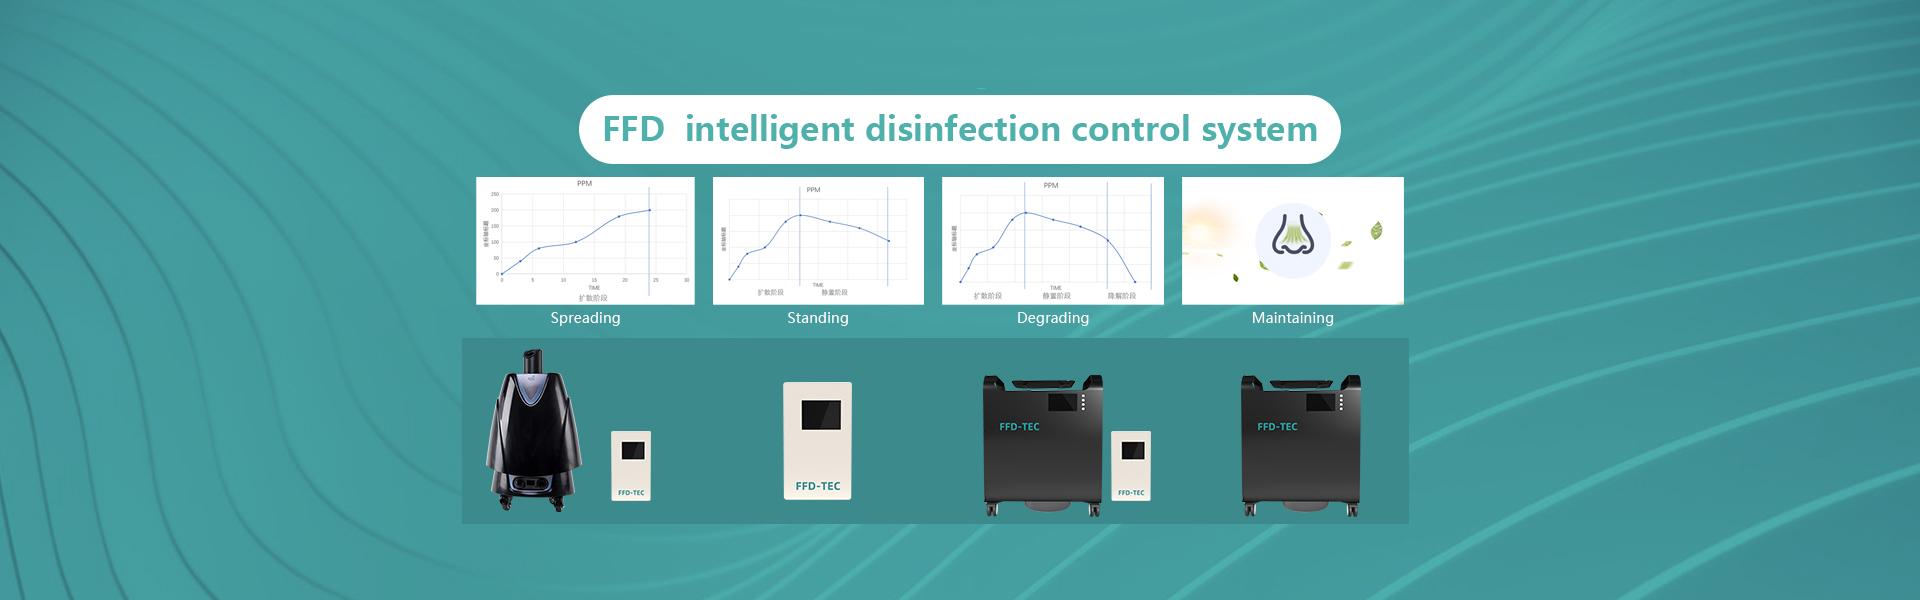 Intelligent IOT disinfection system